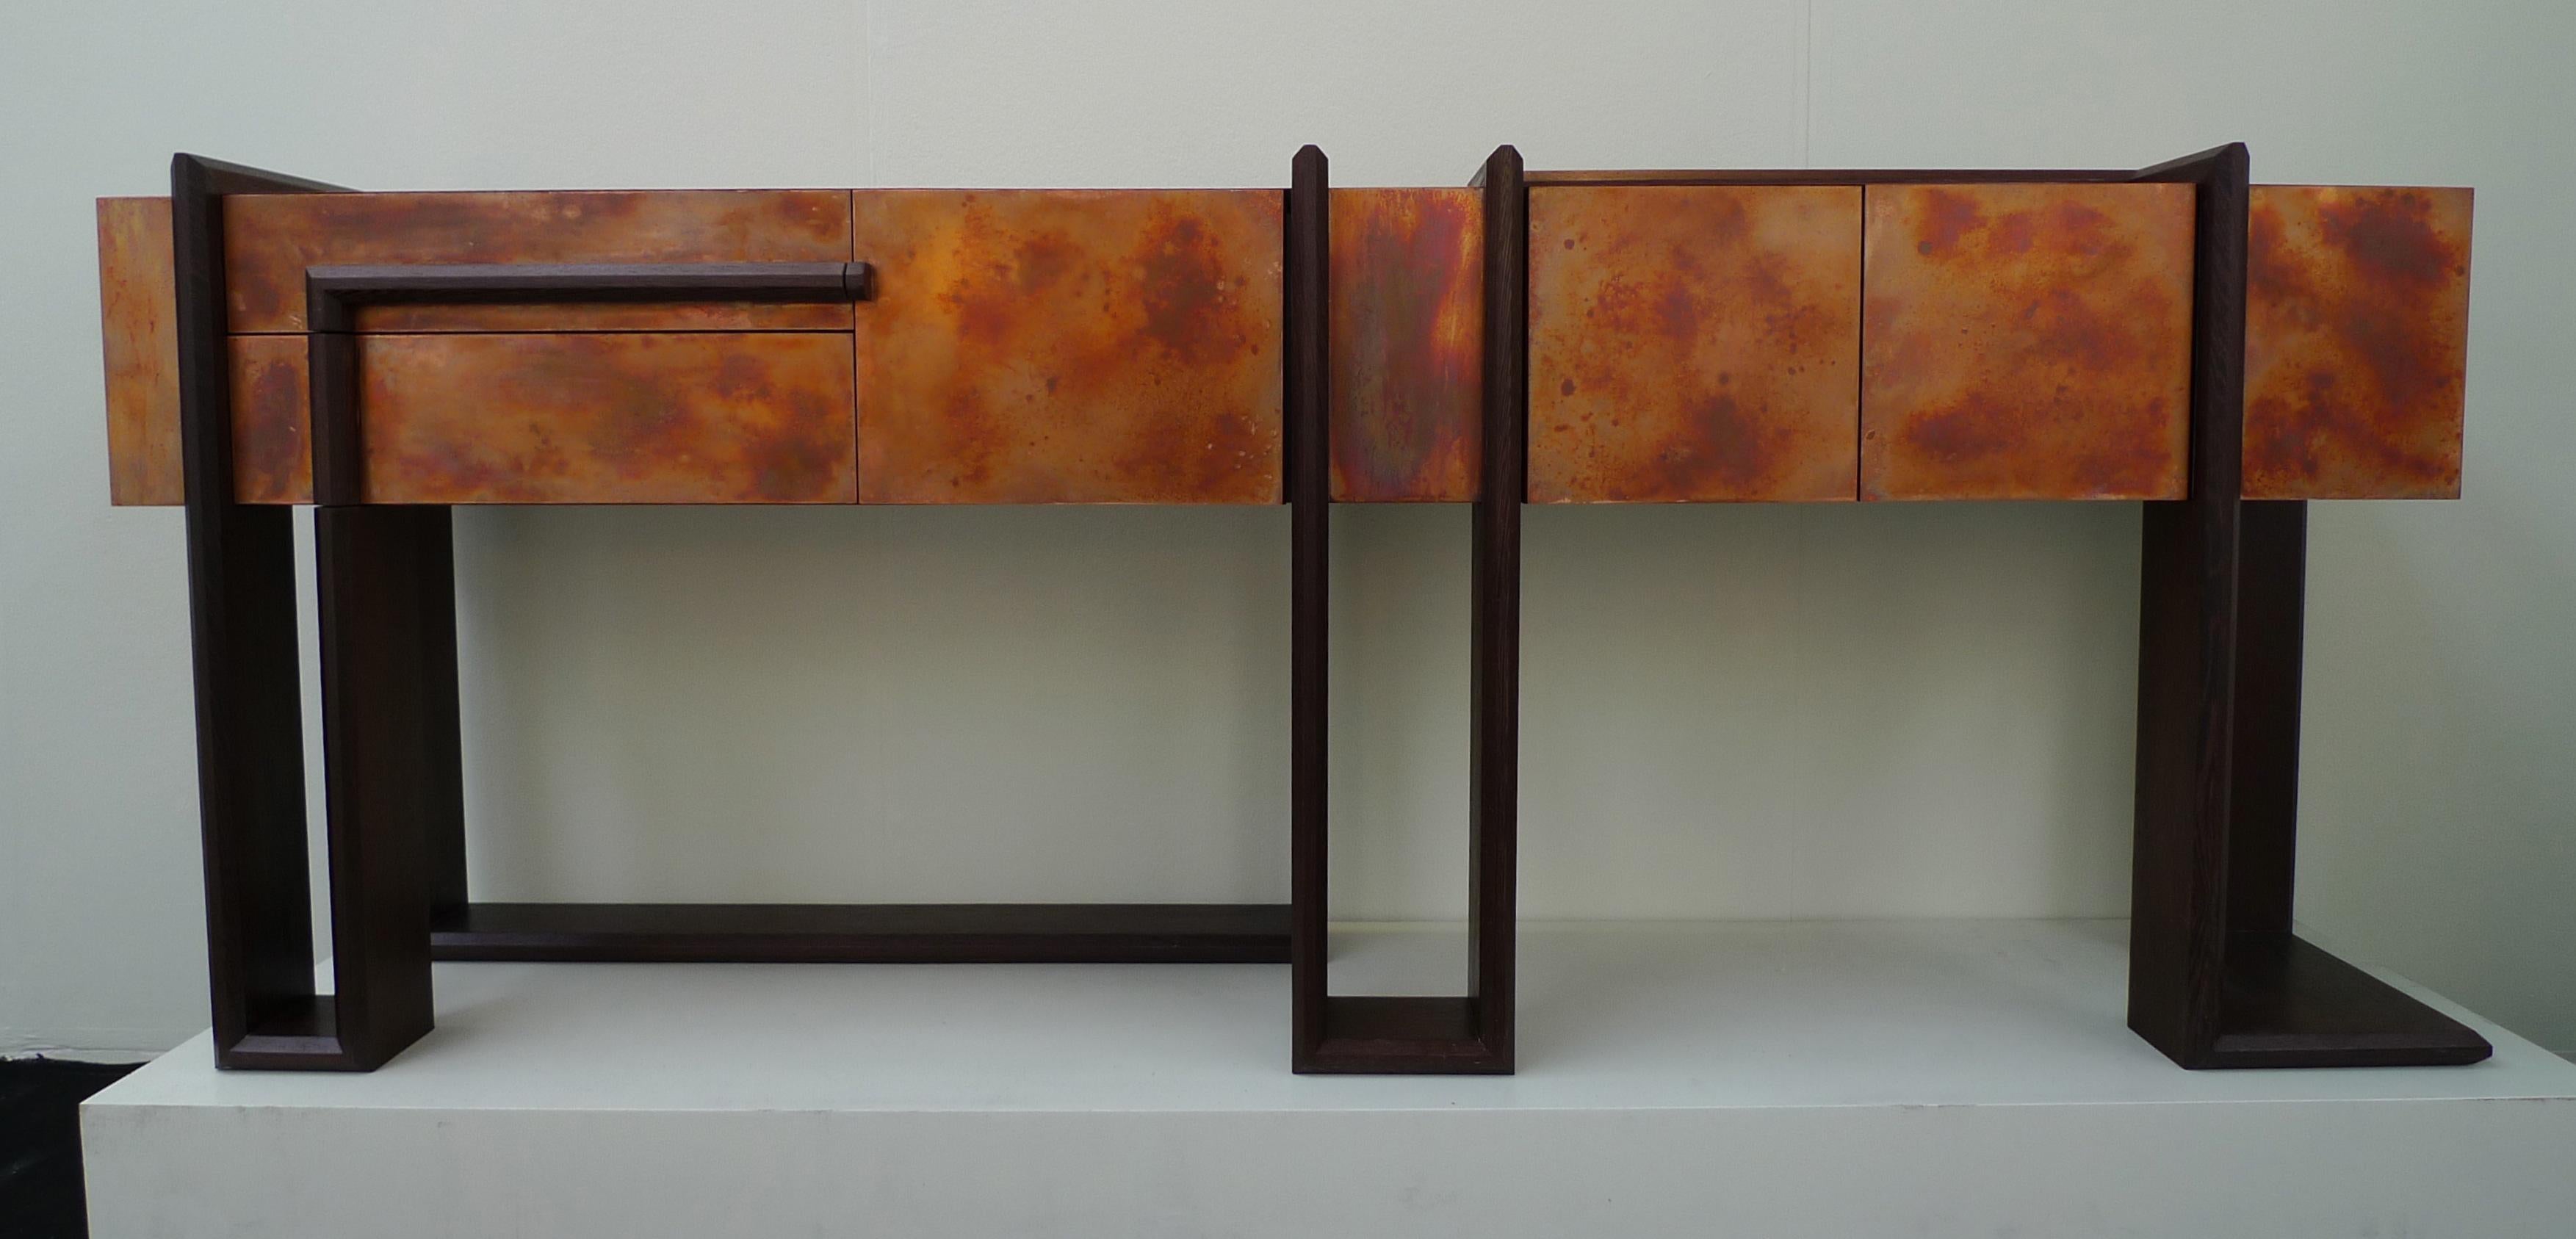 English Contemporary Sequenza Bar Cabinet Credenza Sideboard in Wegne and Copper Patina For Sale